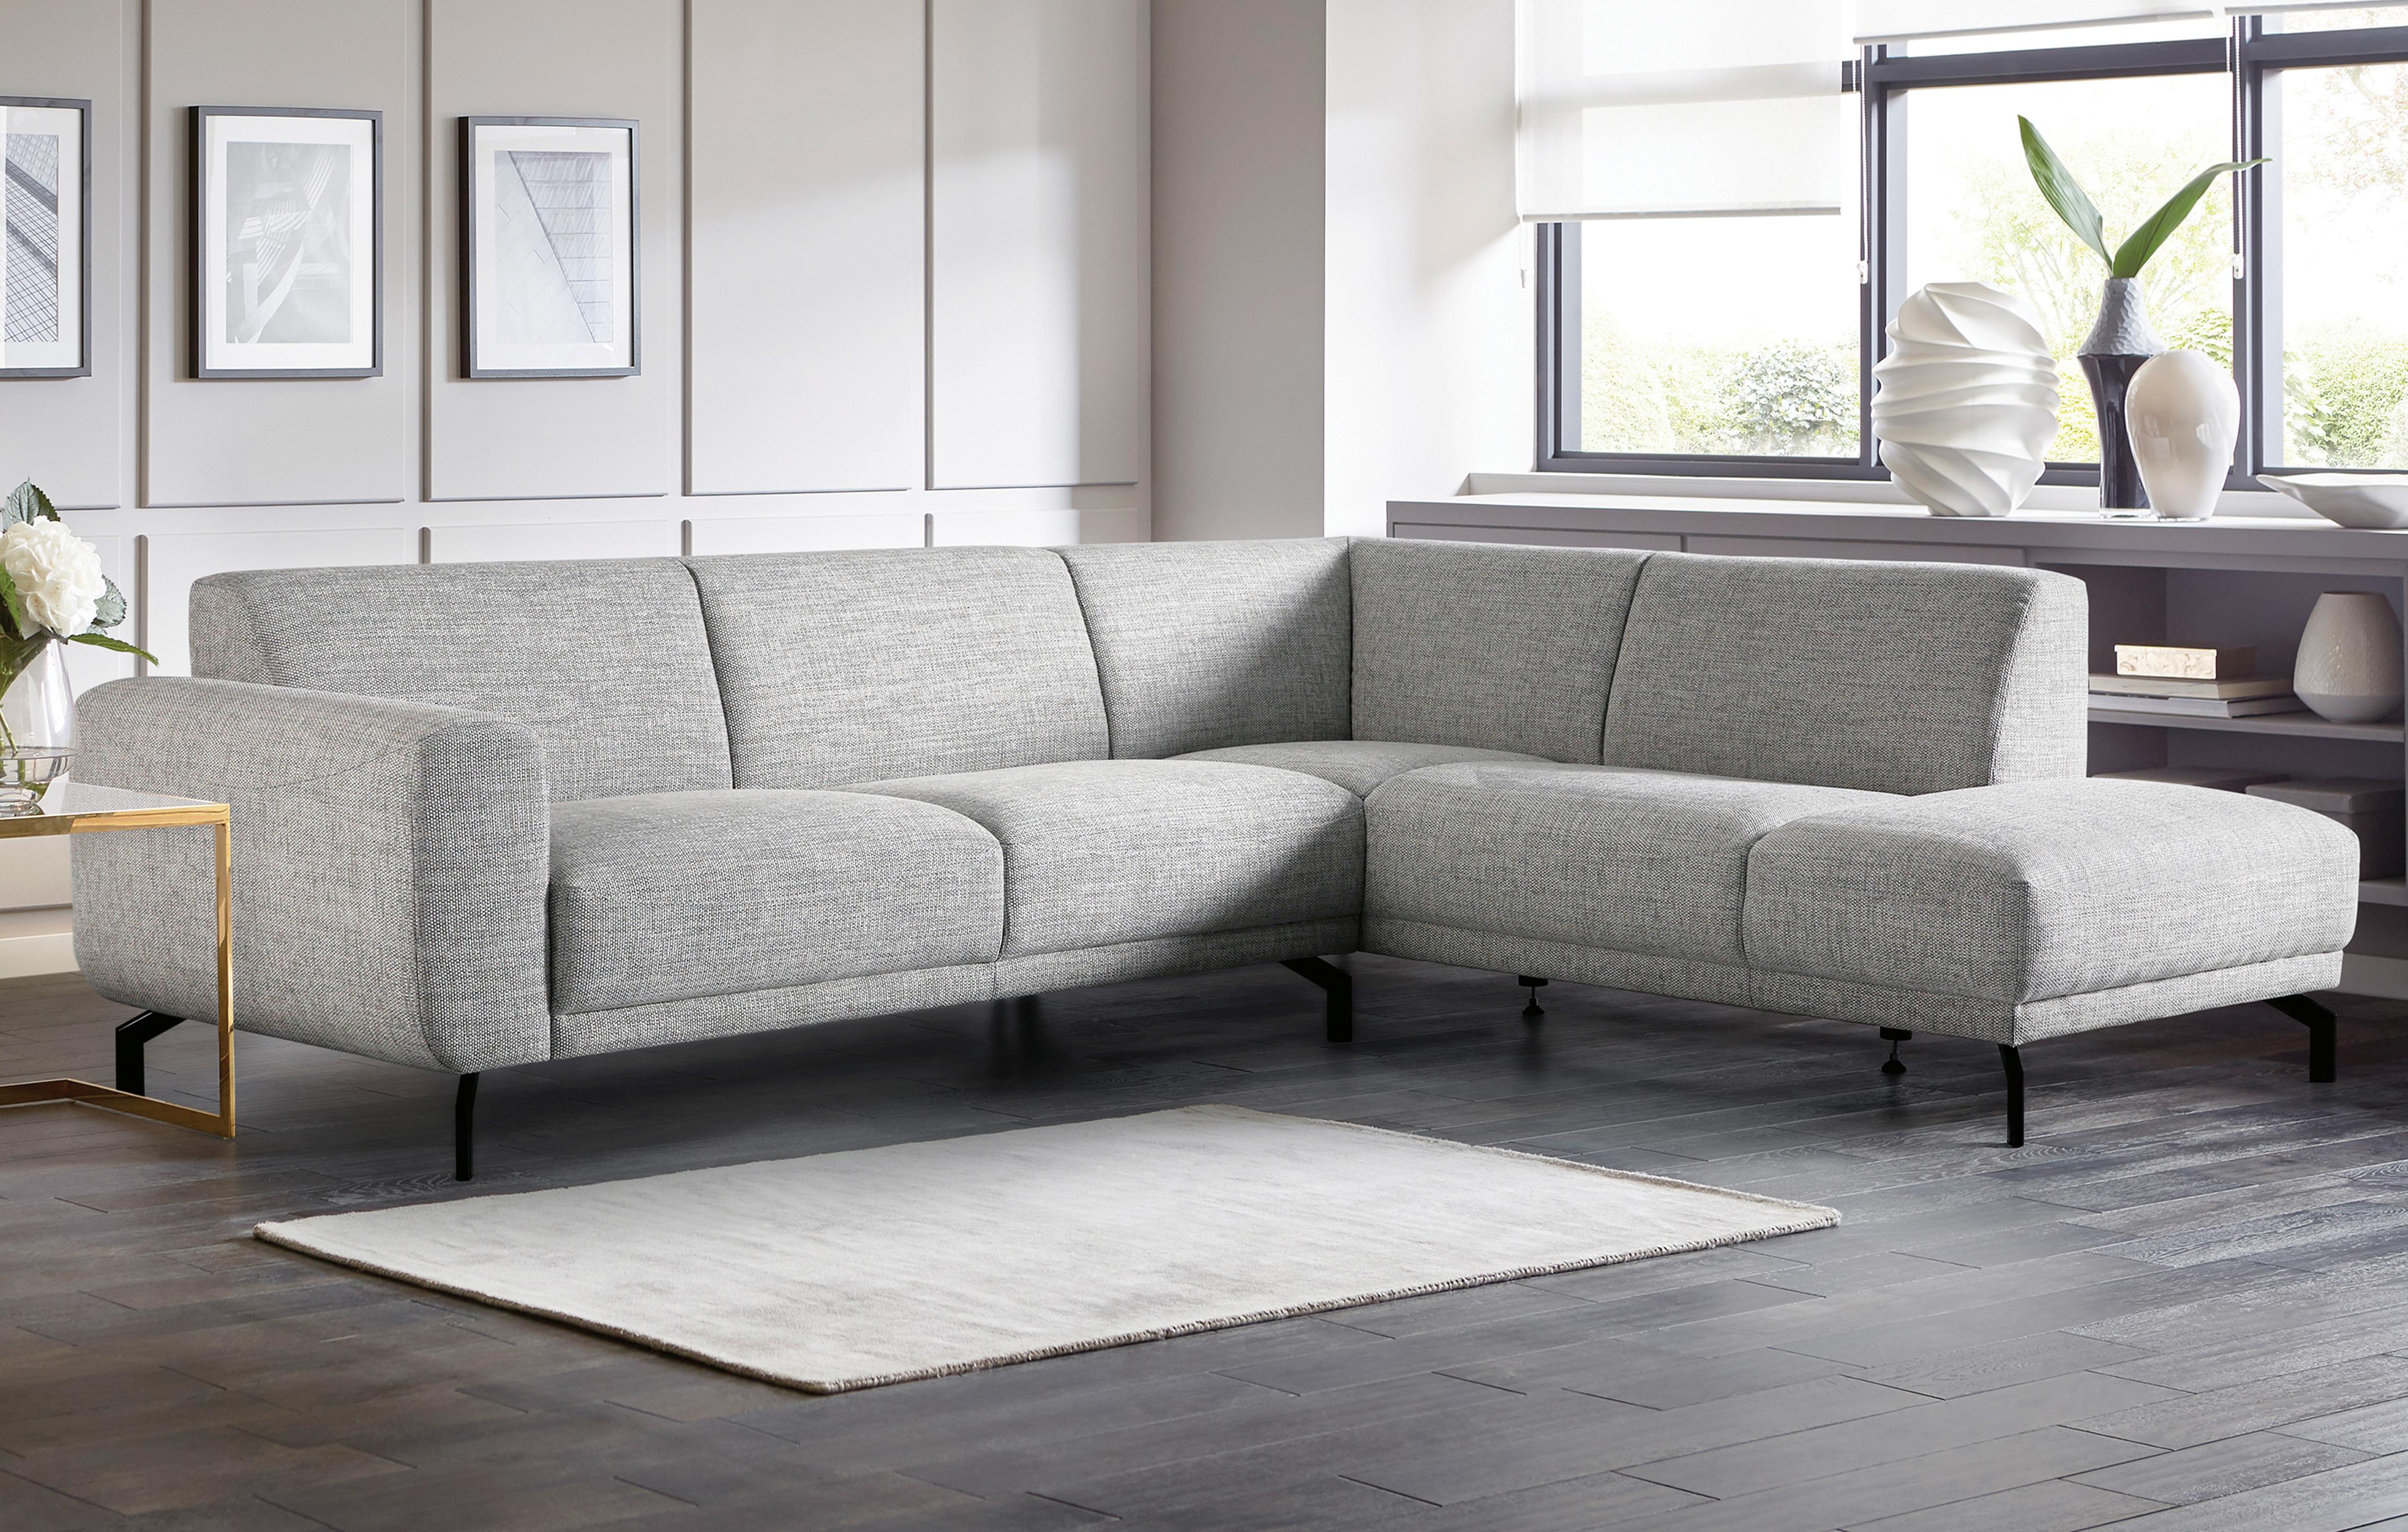 Sofa Corner Dfs 2013 - Dfs sofas come in fabric and ...